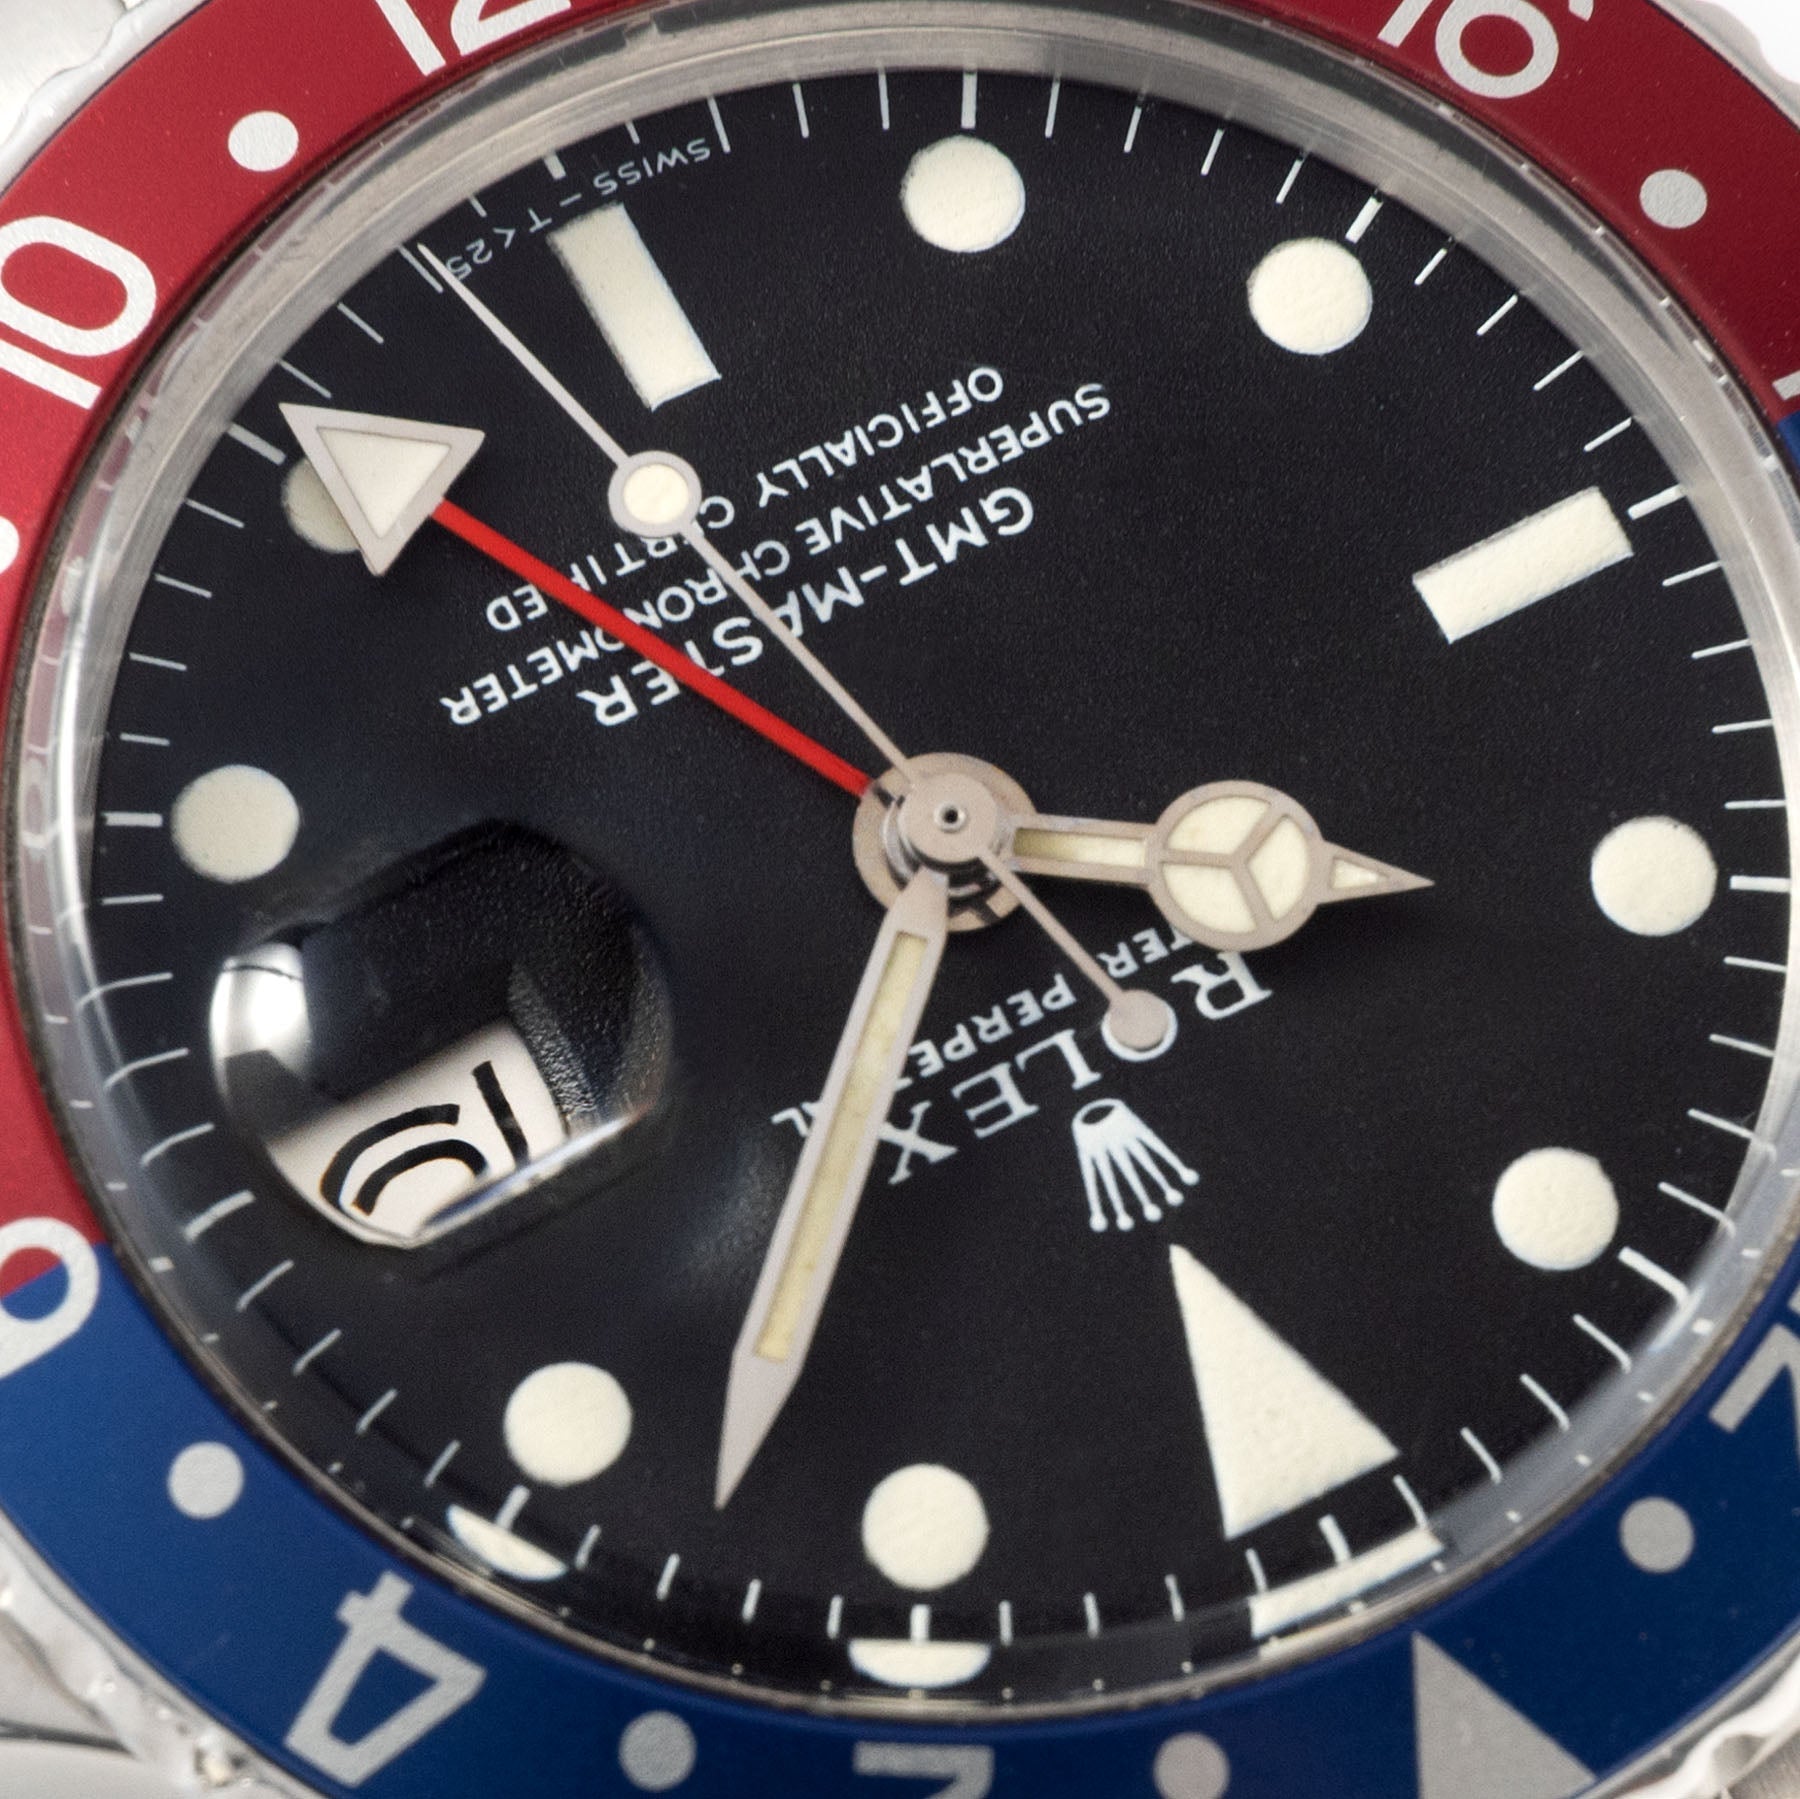 Rolex 1675 GMT Master Mk1 Long E Box and Papers